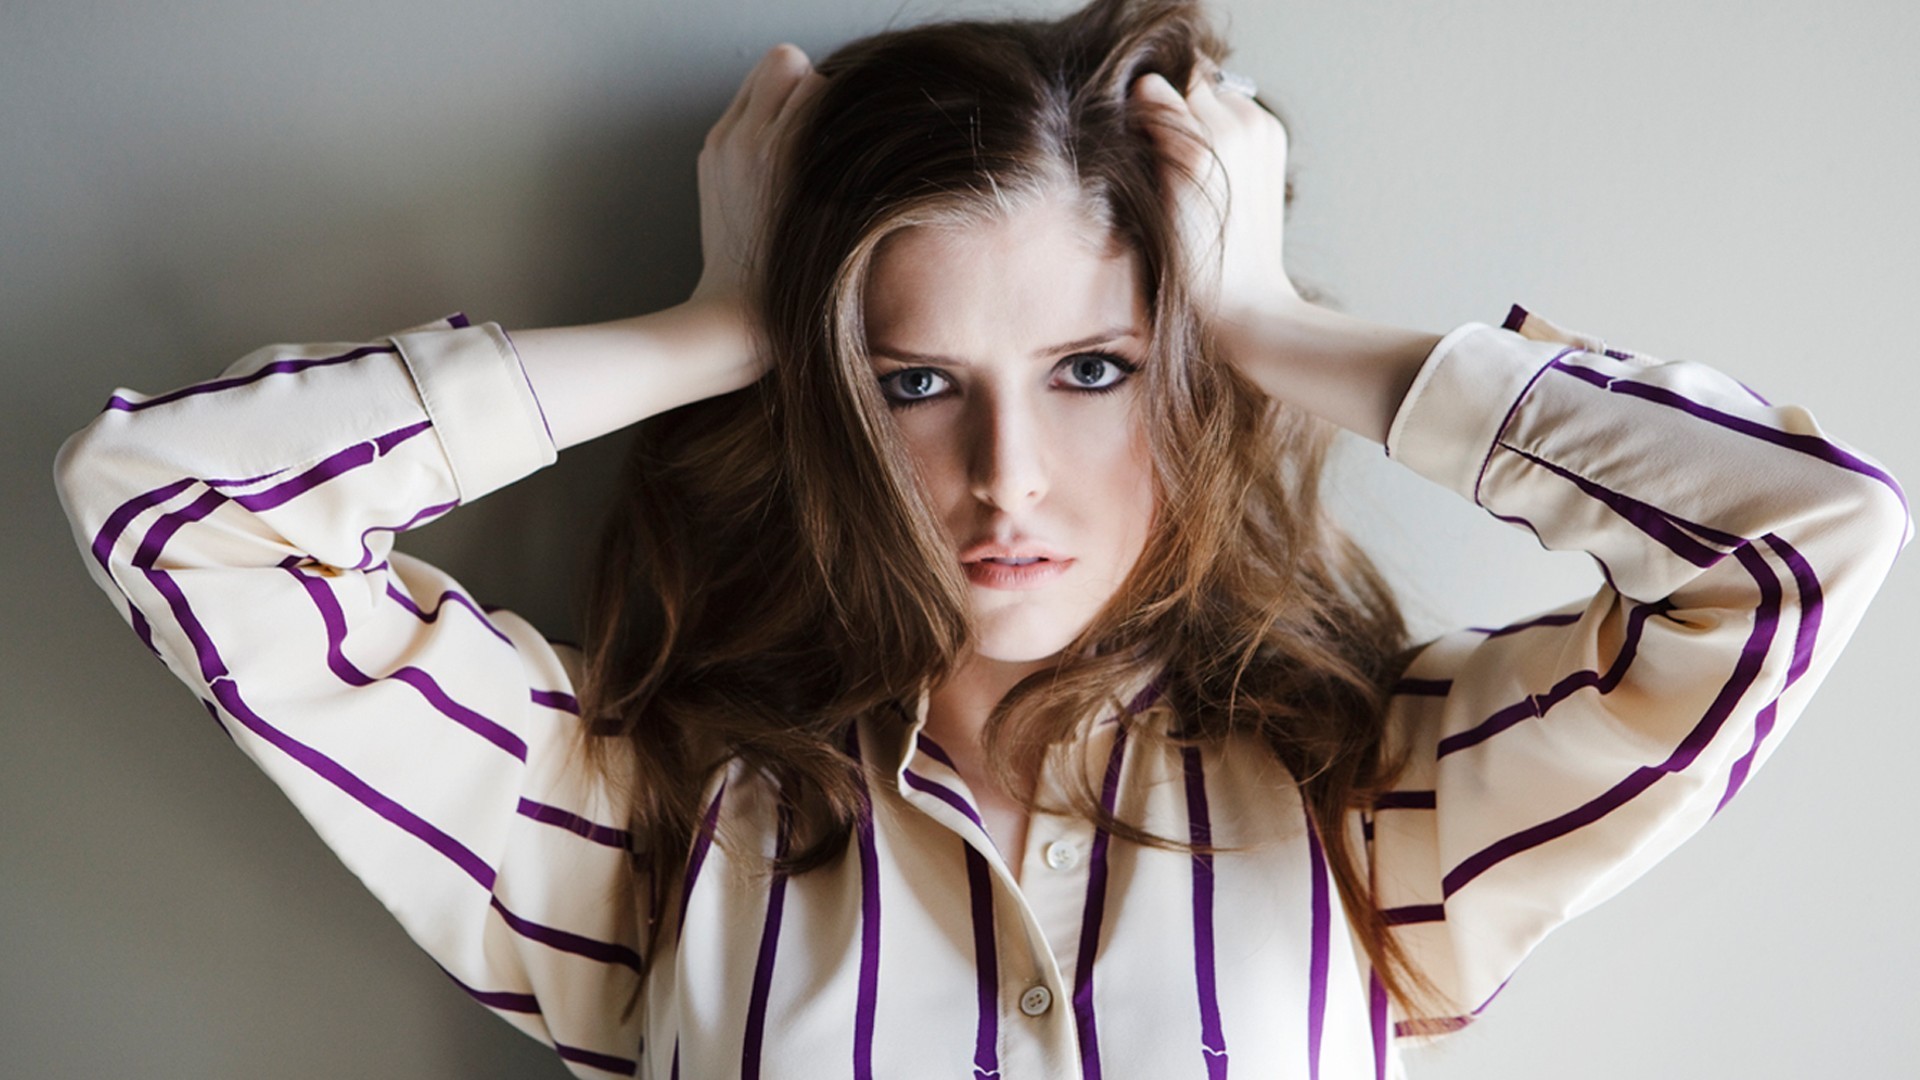 1920x1080 anna kendrick wallpaper free download download hd images amazing free 4k hd  pictures smart phone 1920Ã1080 Wallpaper HD